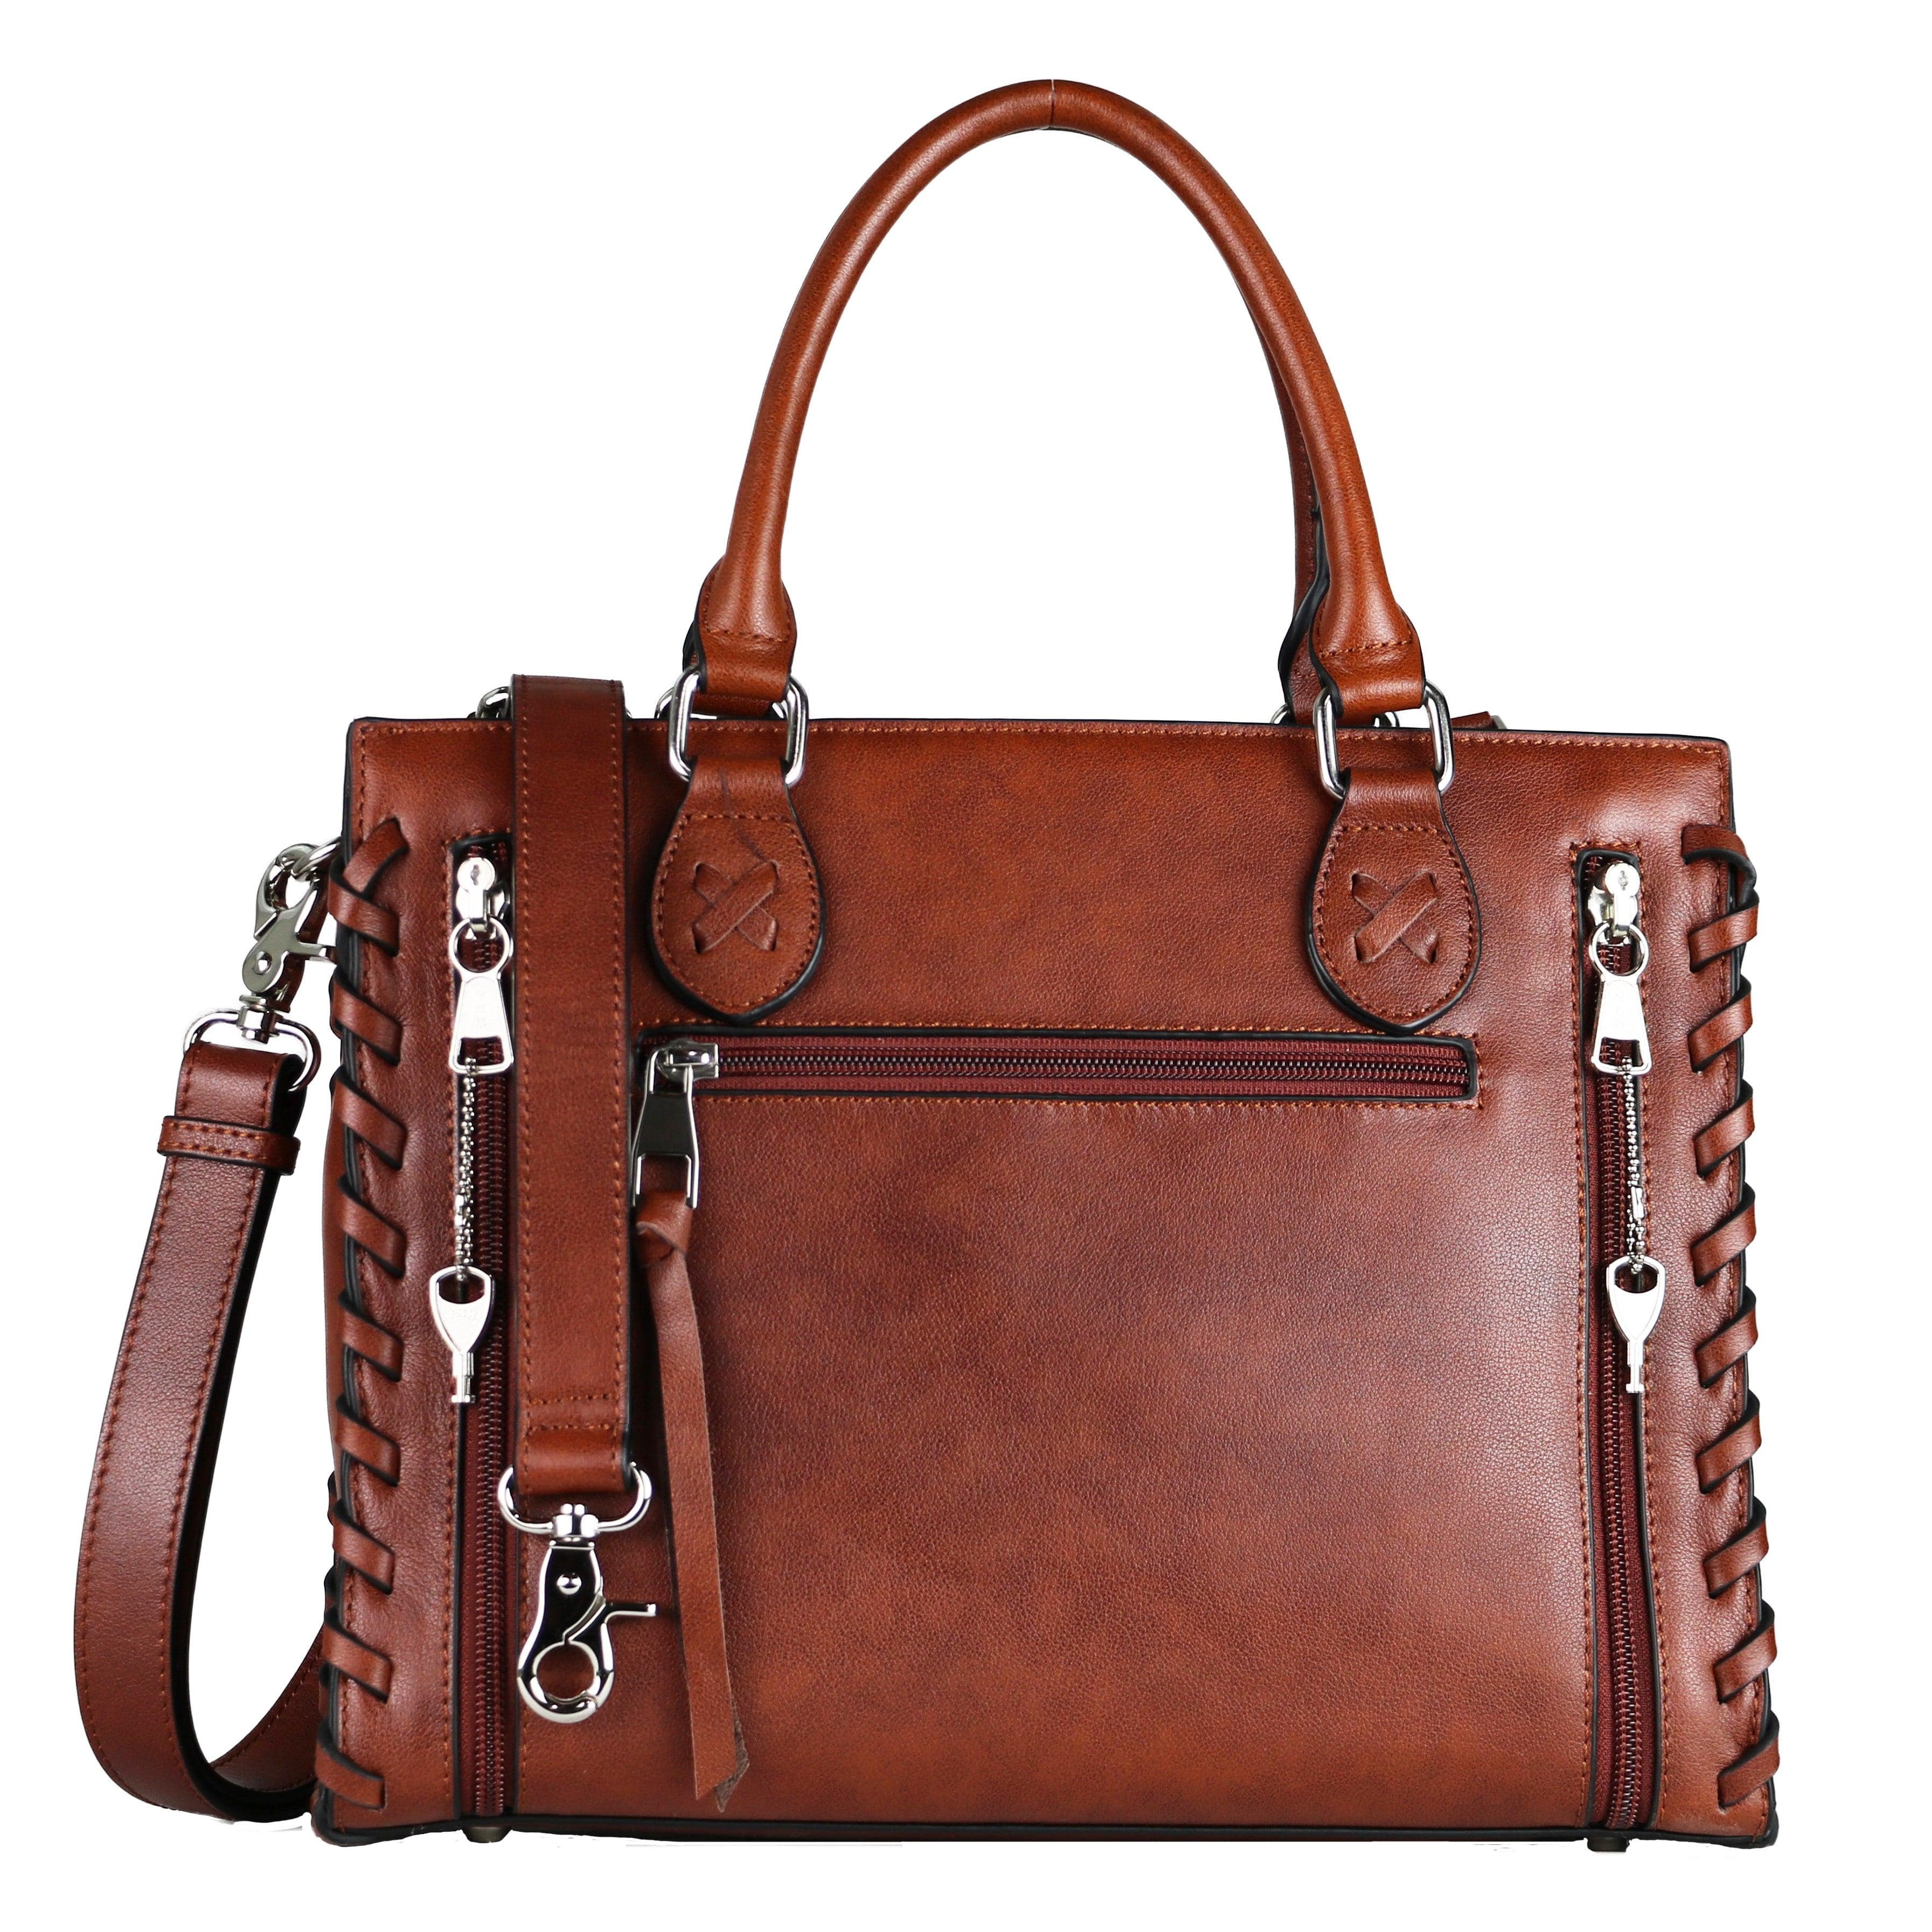 Concealed Carry Emma Leather Satchel -  Designer Concealed Carry Purse -  YKK Locking Purse with Universal Holster -  Leather Bag For Gun Owners - Easy Conceal Carry -  CCW Purse for Women -  concealed carry Handbag for woman -  Conceal and Carry purse for Handgun -   Designer Luxury Conceal Carry Handbag -  Unique Hide Handbag Gun and Pistol Bag -  carry Handbag for concealed gun carry -  Unique Emma gun Handbag - 